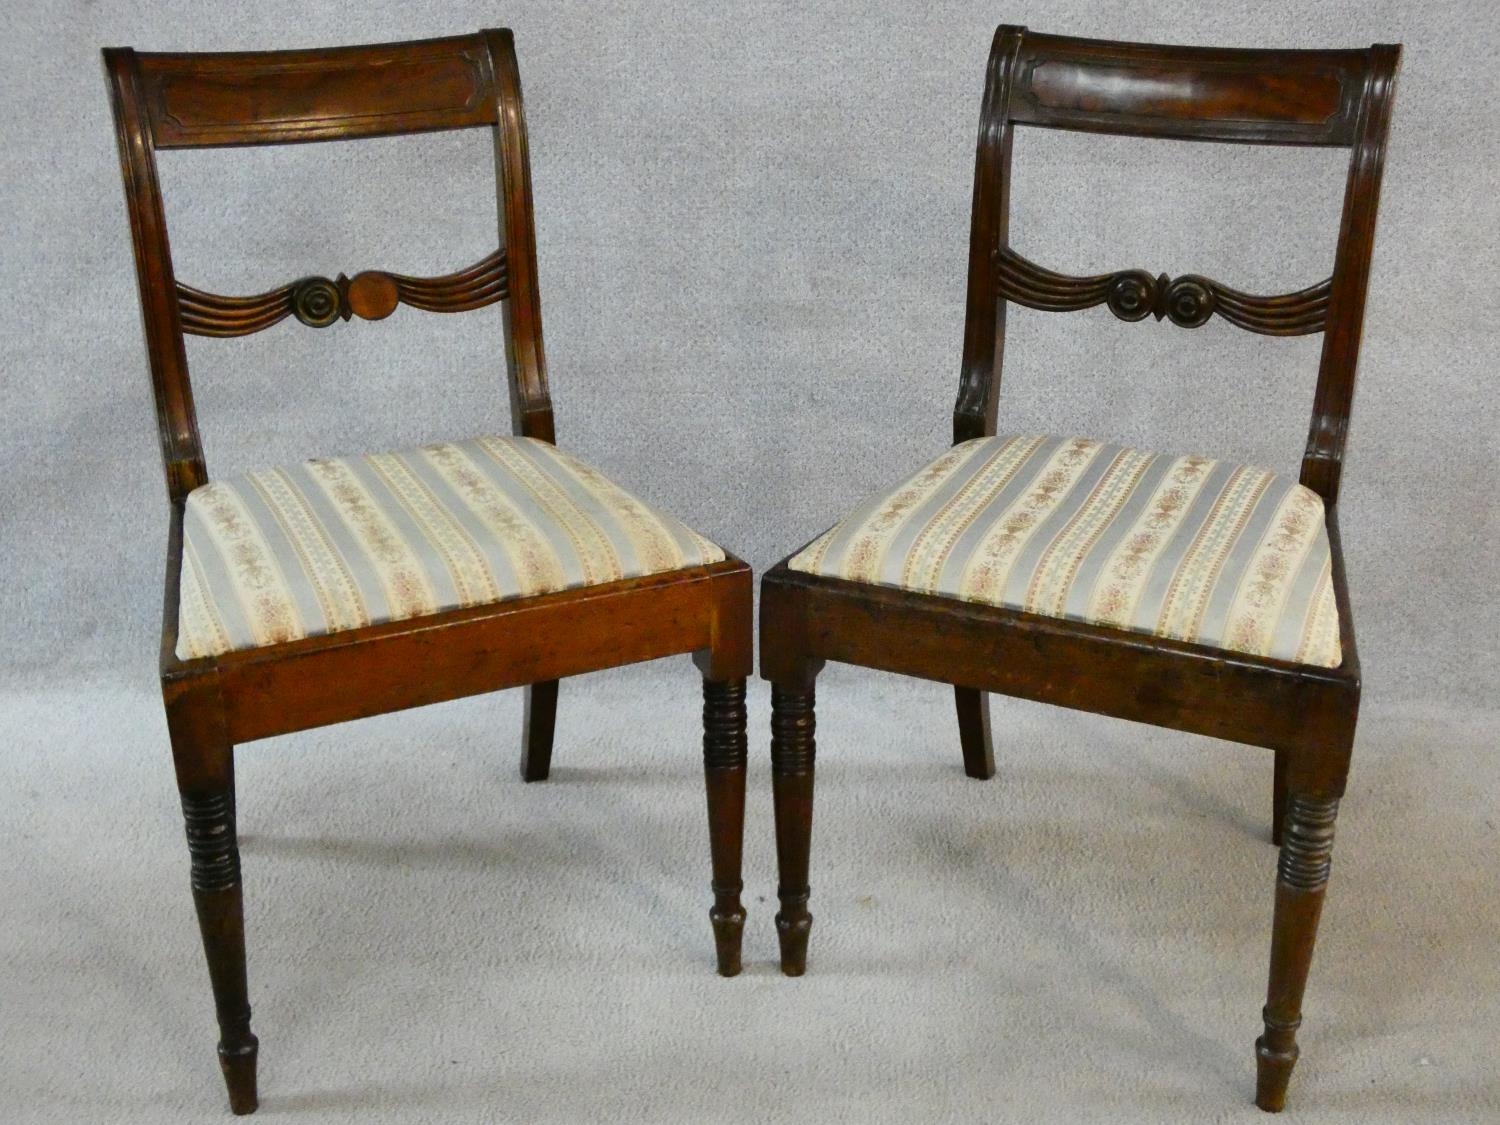 A pair of late Georgian mahogany dining chairs with carved bar backs and splats above drop in